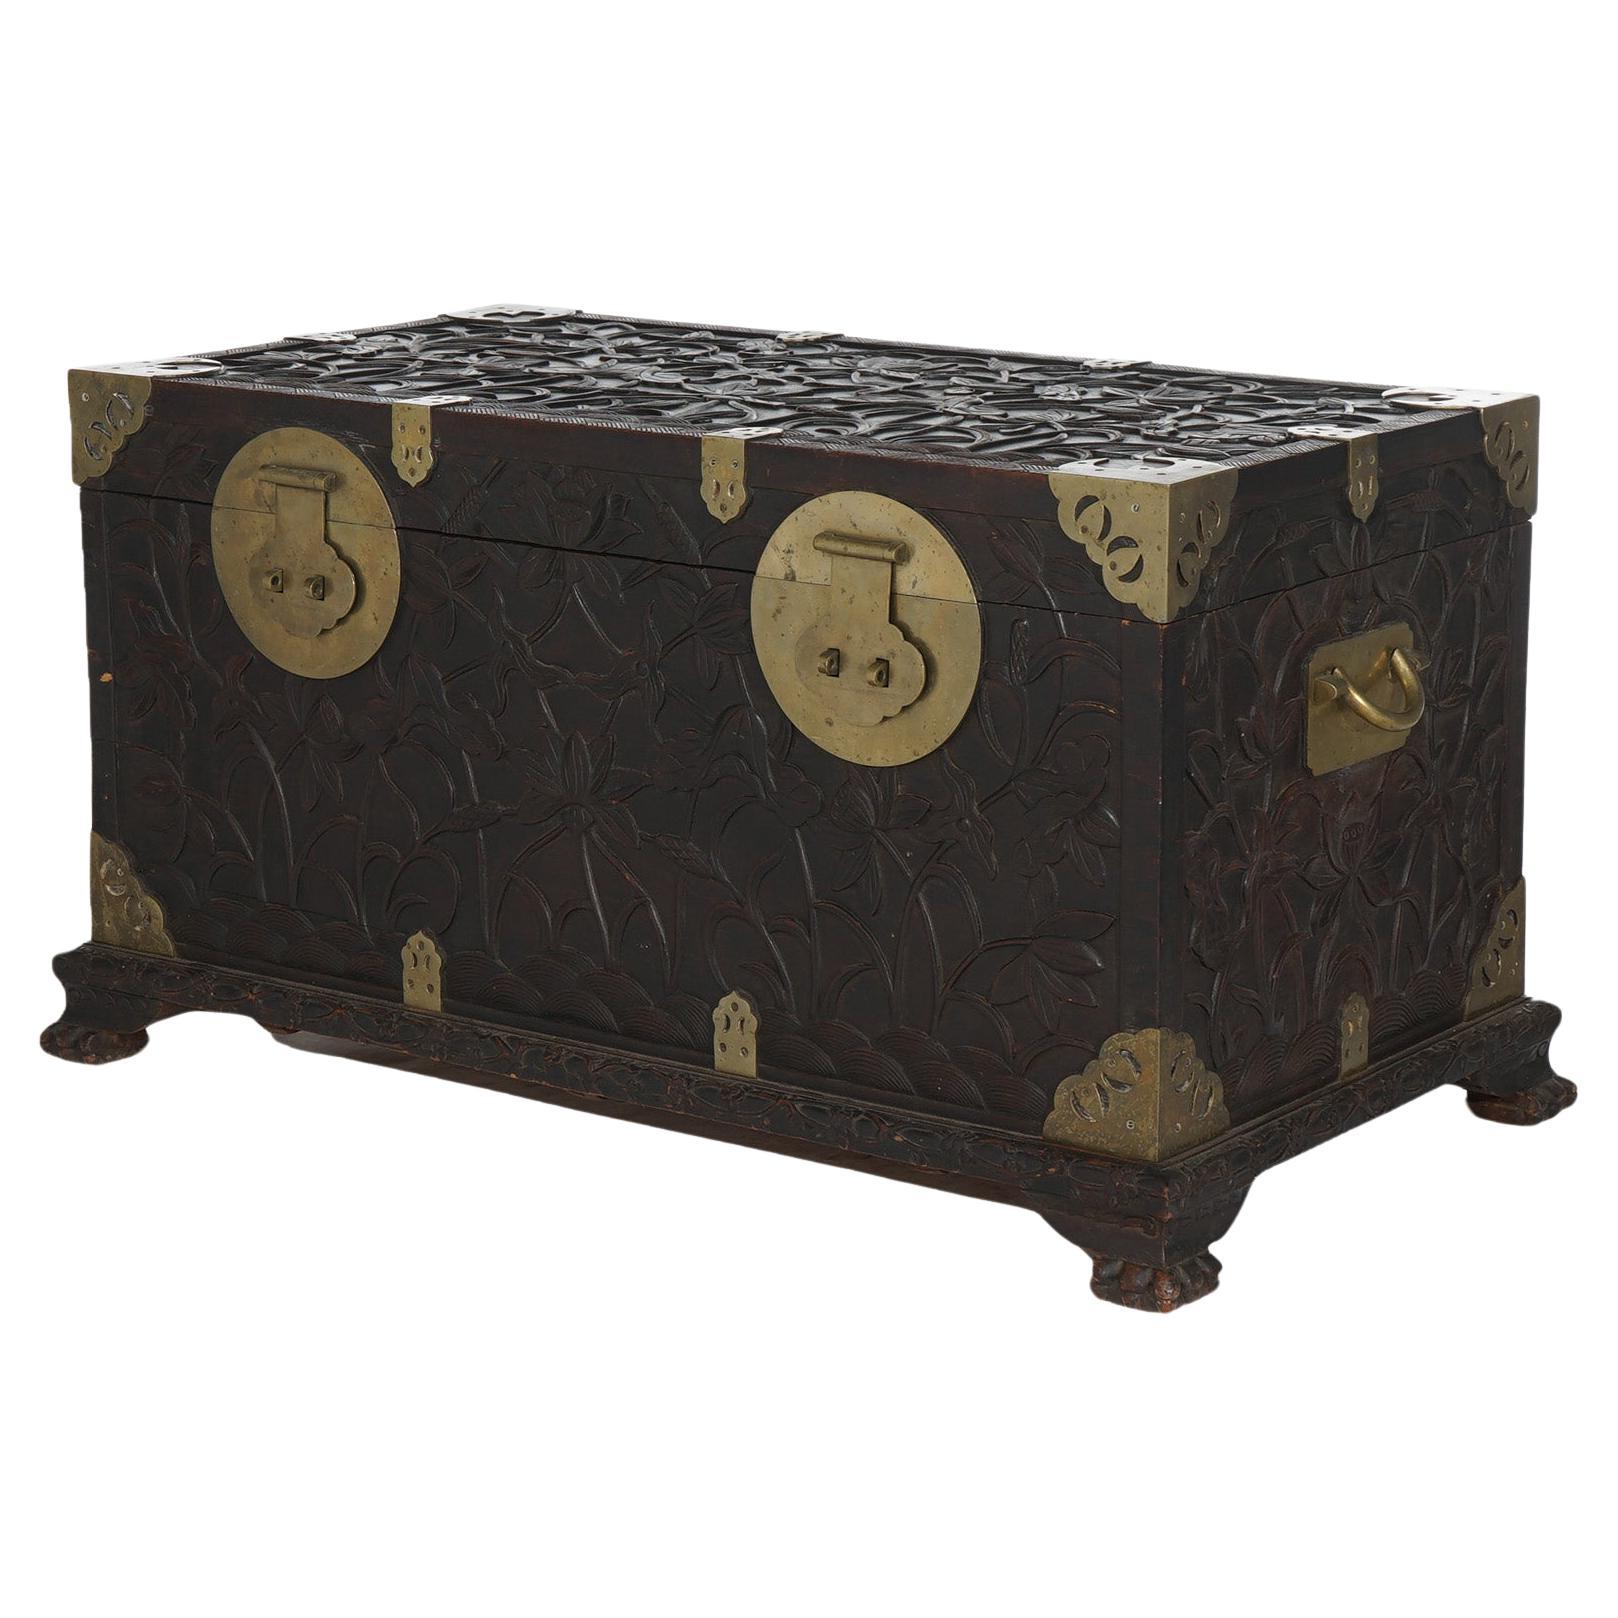 Antique Chinese Blanket Wedding Chest Carved in Relief with Floral Design C1890 For Sale